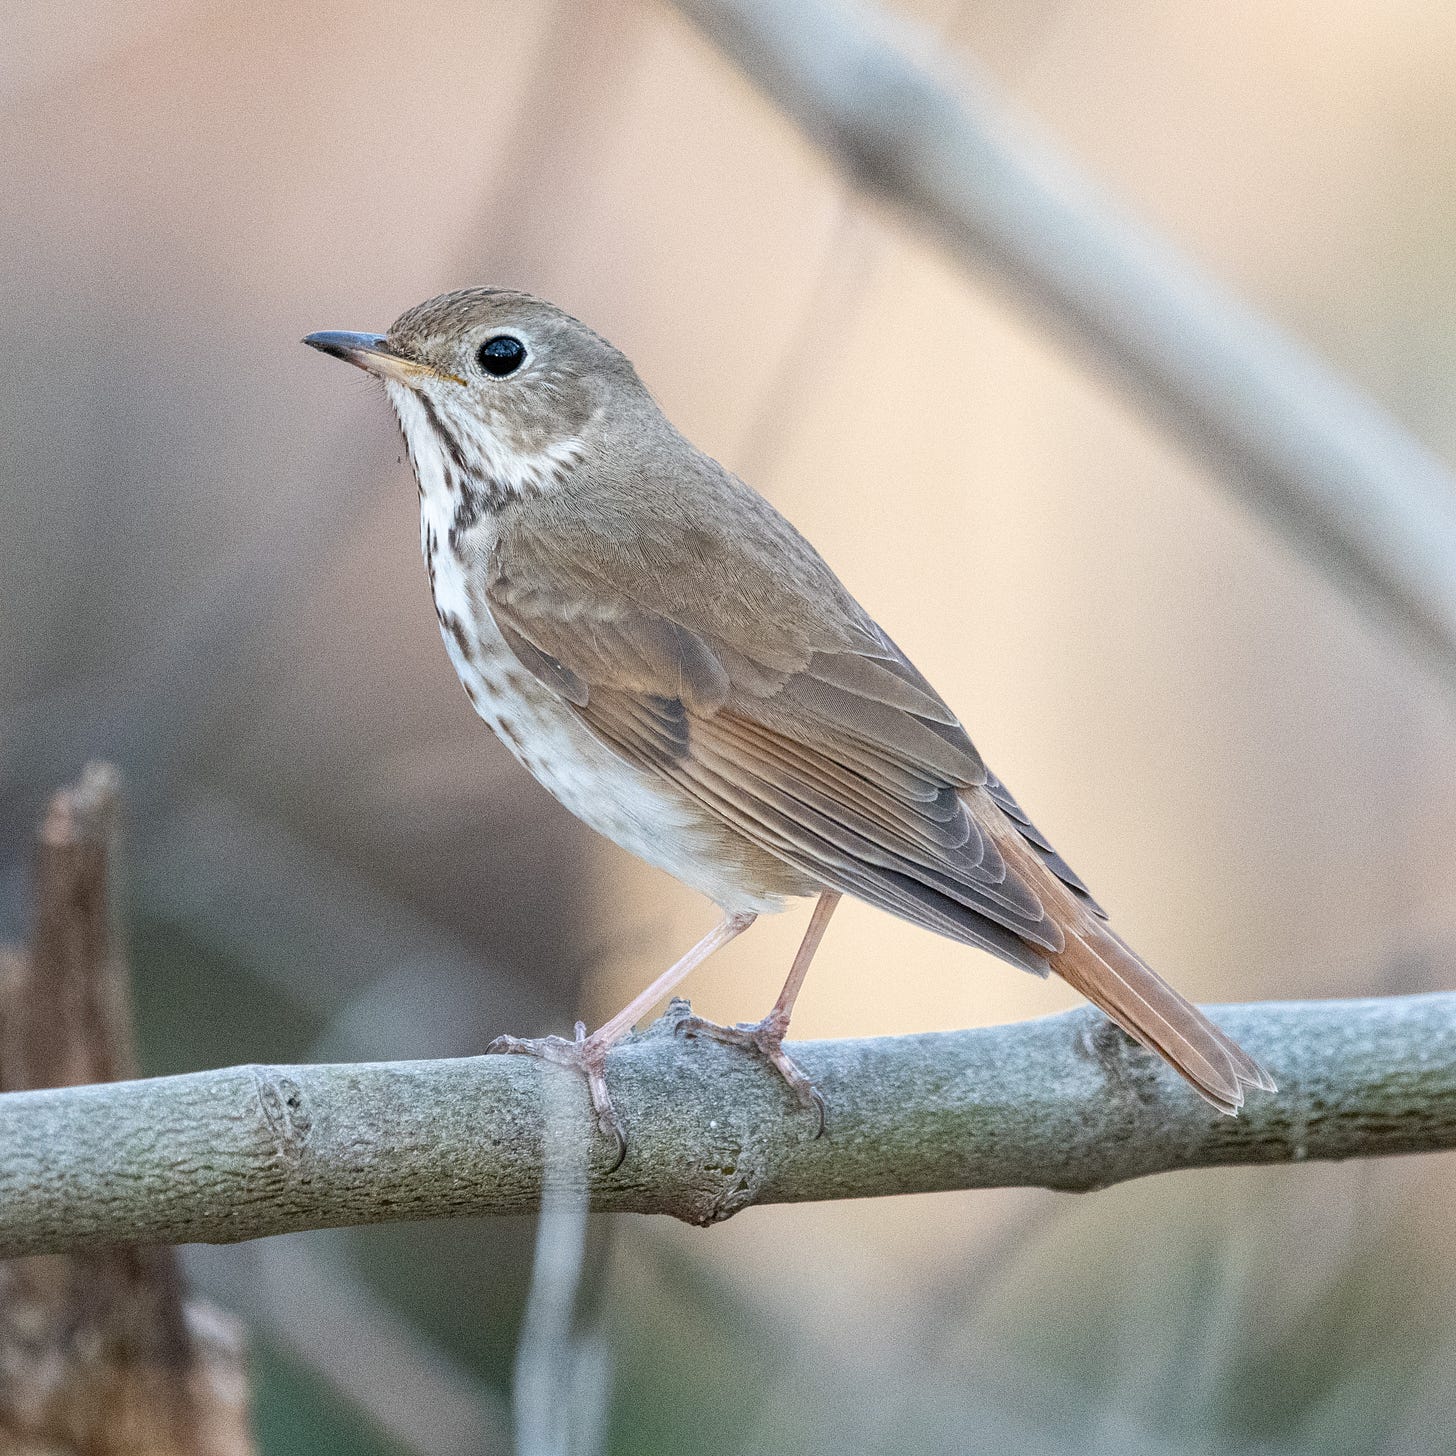 A close-up of a hermit thrush, perched and facing left